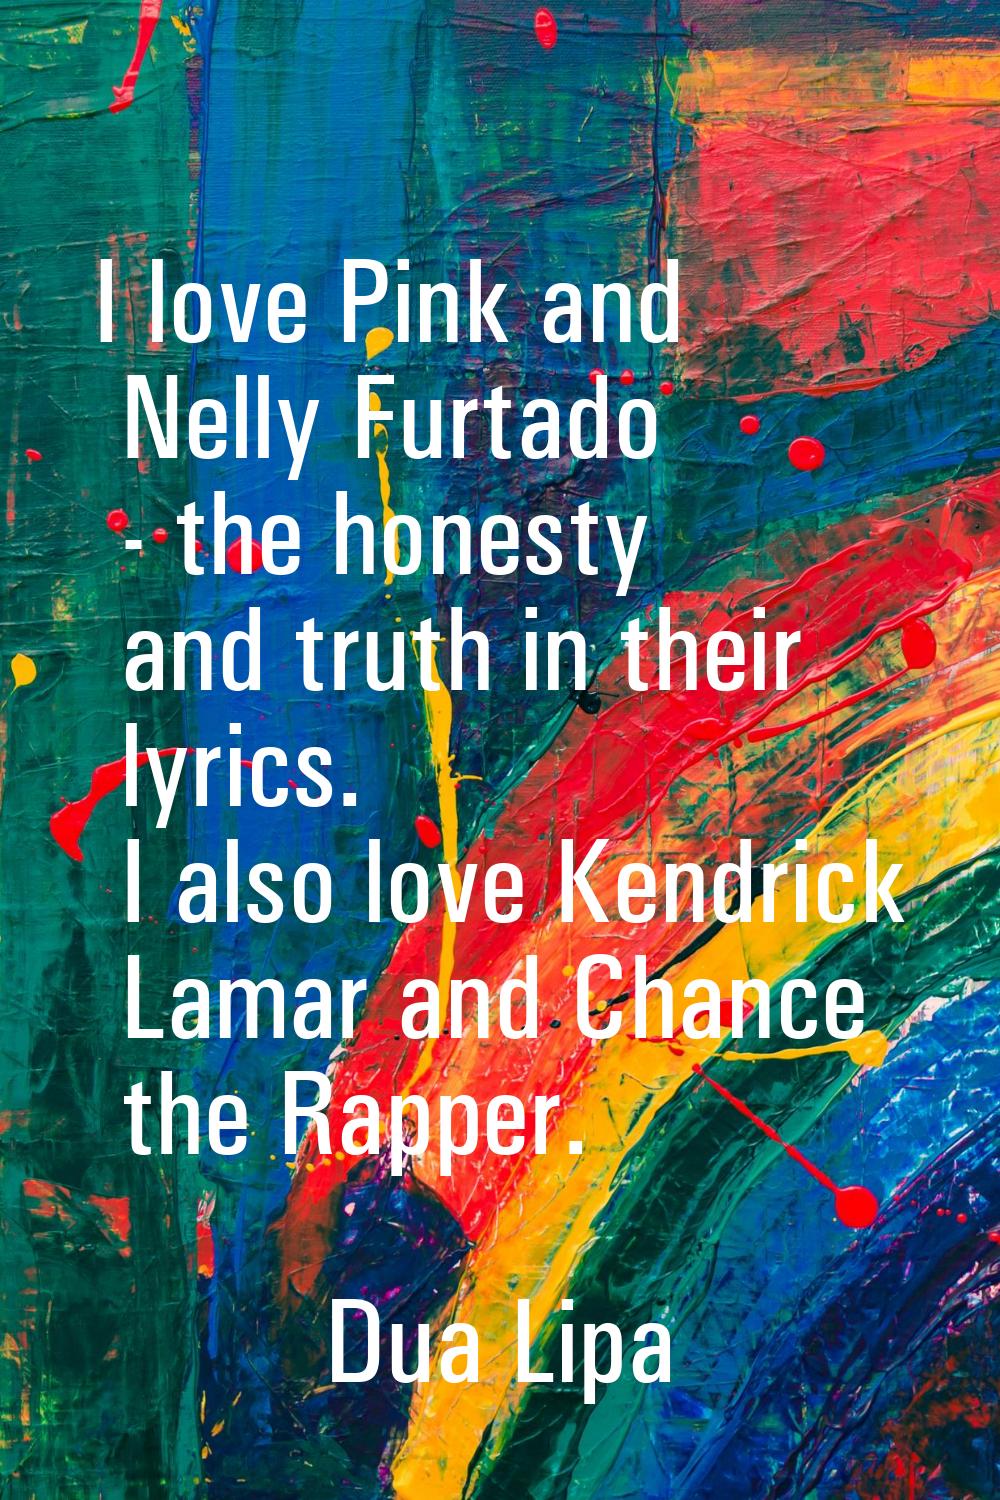 I love Pink and Nelly Furtado - the honesty and truth in their lyrics. I also love Kendrick Lamar a